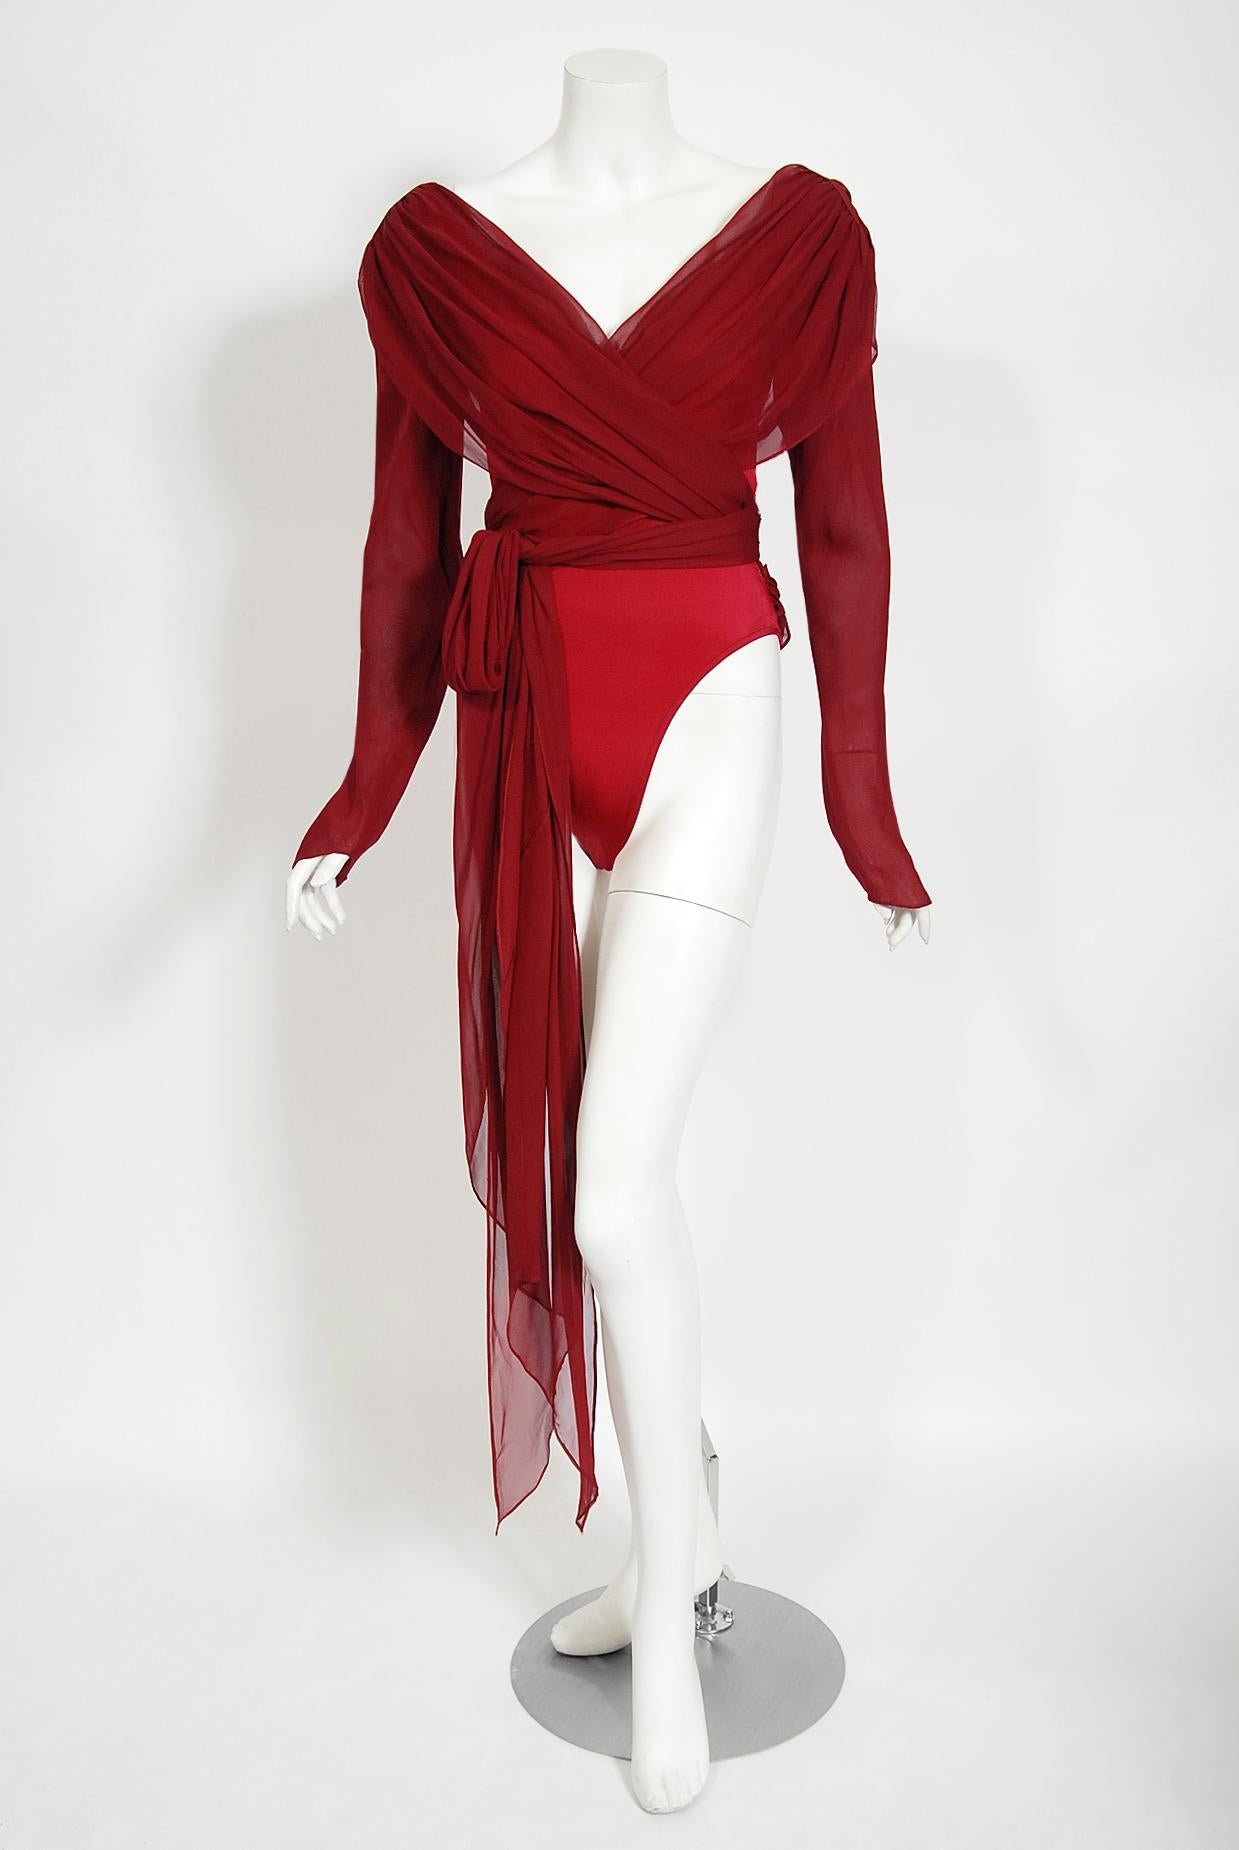 Incredibly stunning and highly desirable Giorgio Sant' Angelo designer bodysuit ensemble dating back to the late 1970's. He first hit the fashion scene when Diana Vreeland asked him to design clothing for a desert location shoot that starred